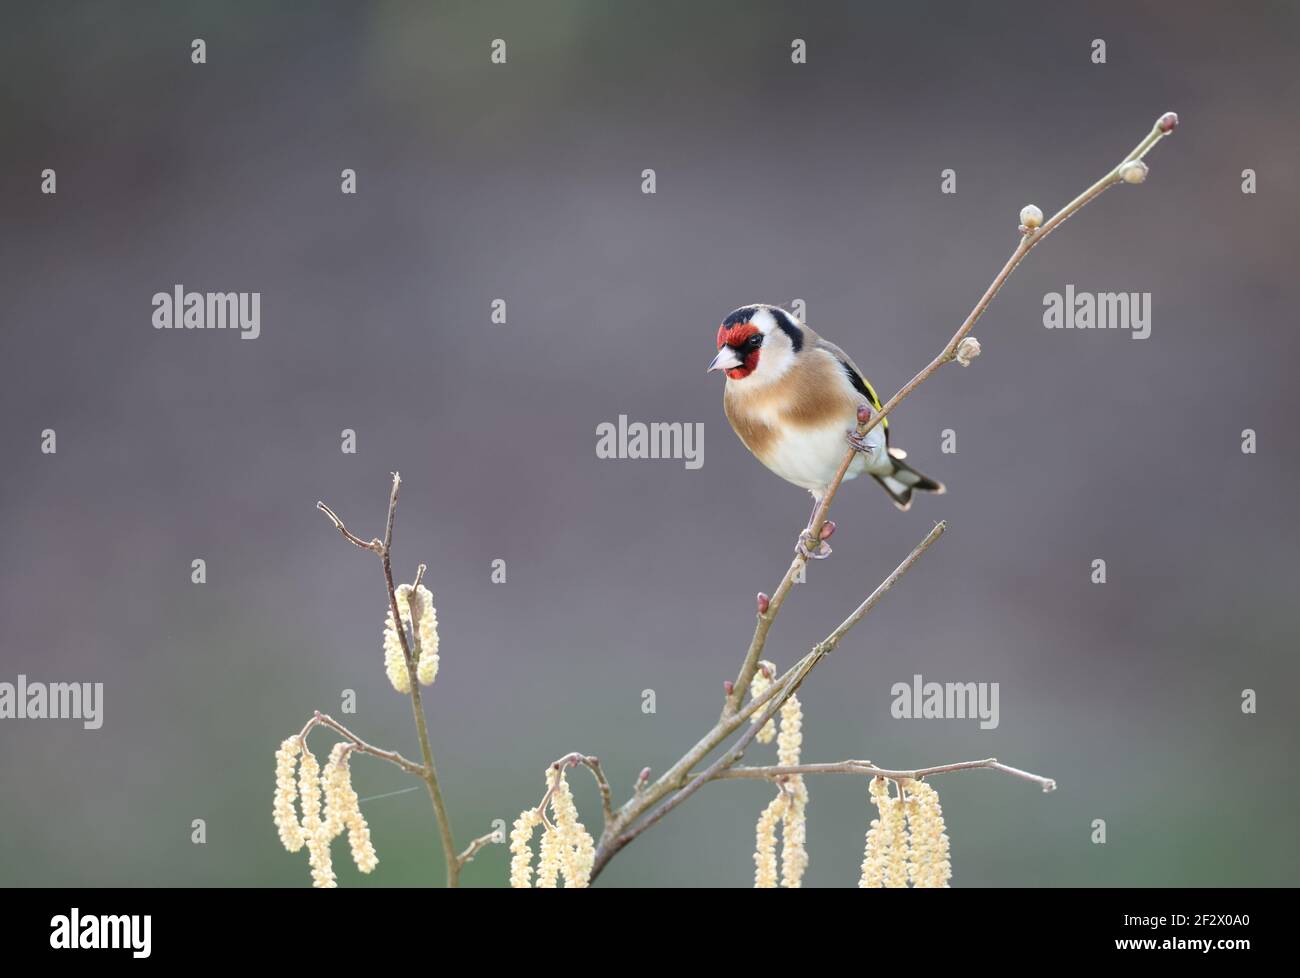 European Goldfinch, Carduelis carduelis, perched on a branch in winter. Wales 2021 Stock Photo